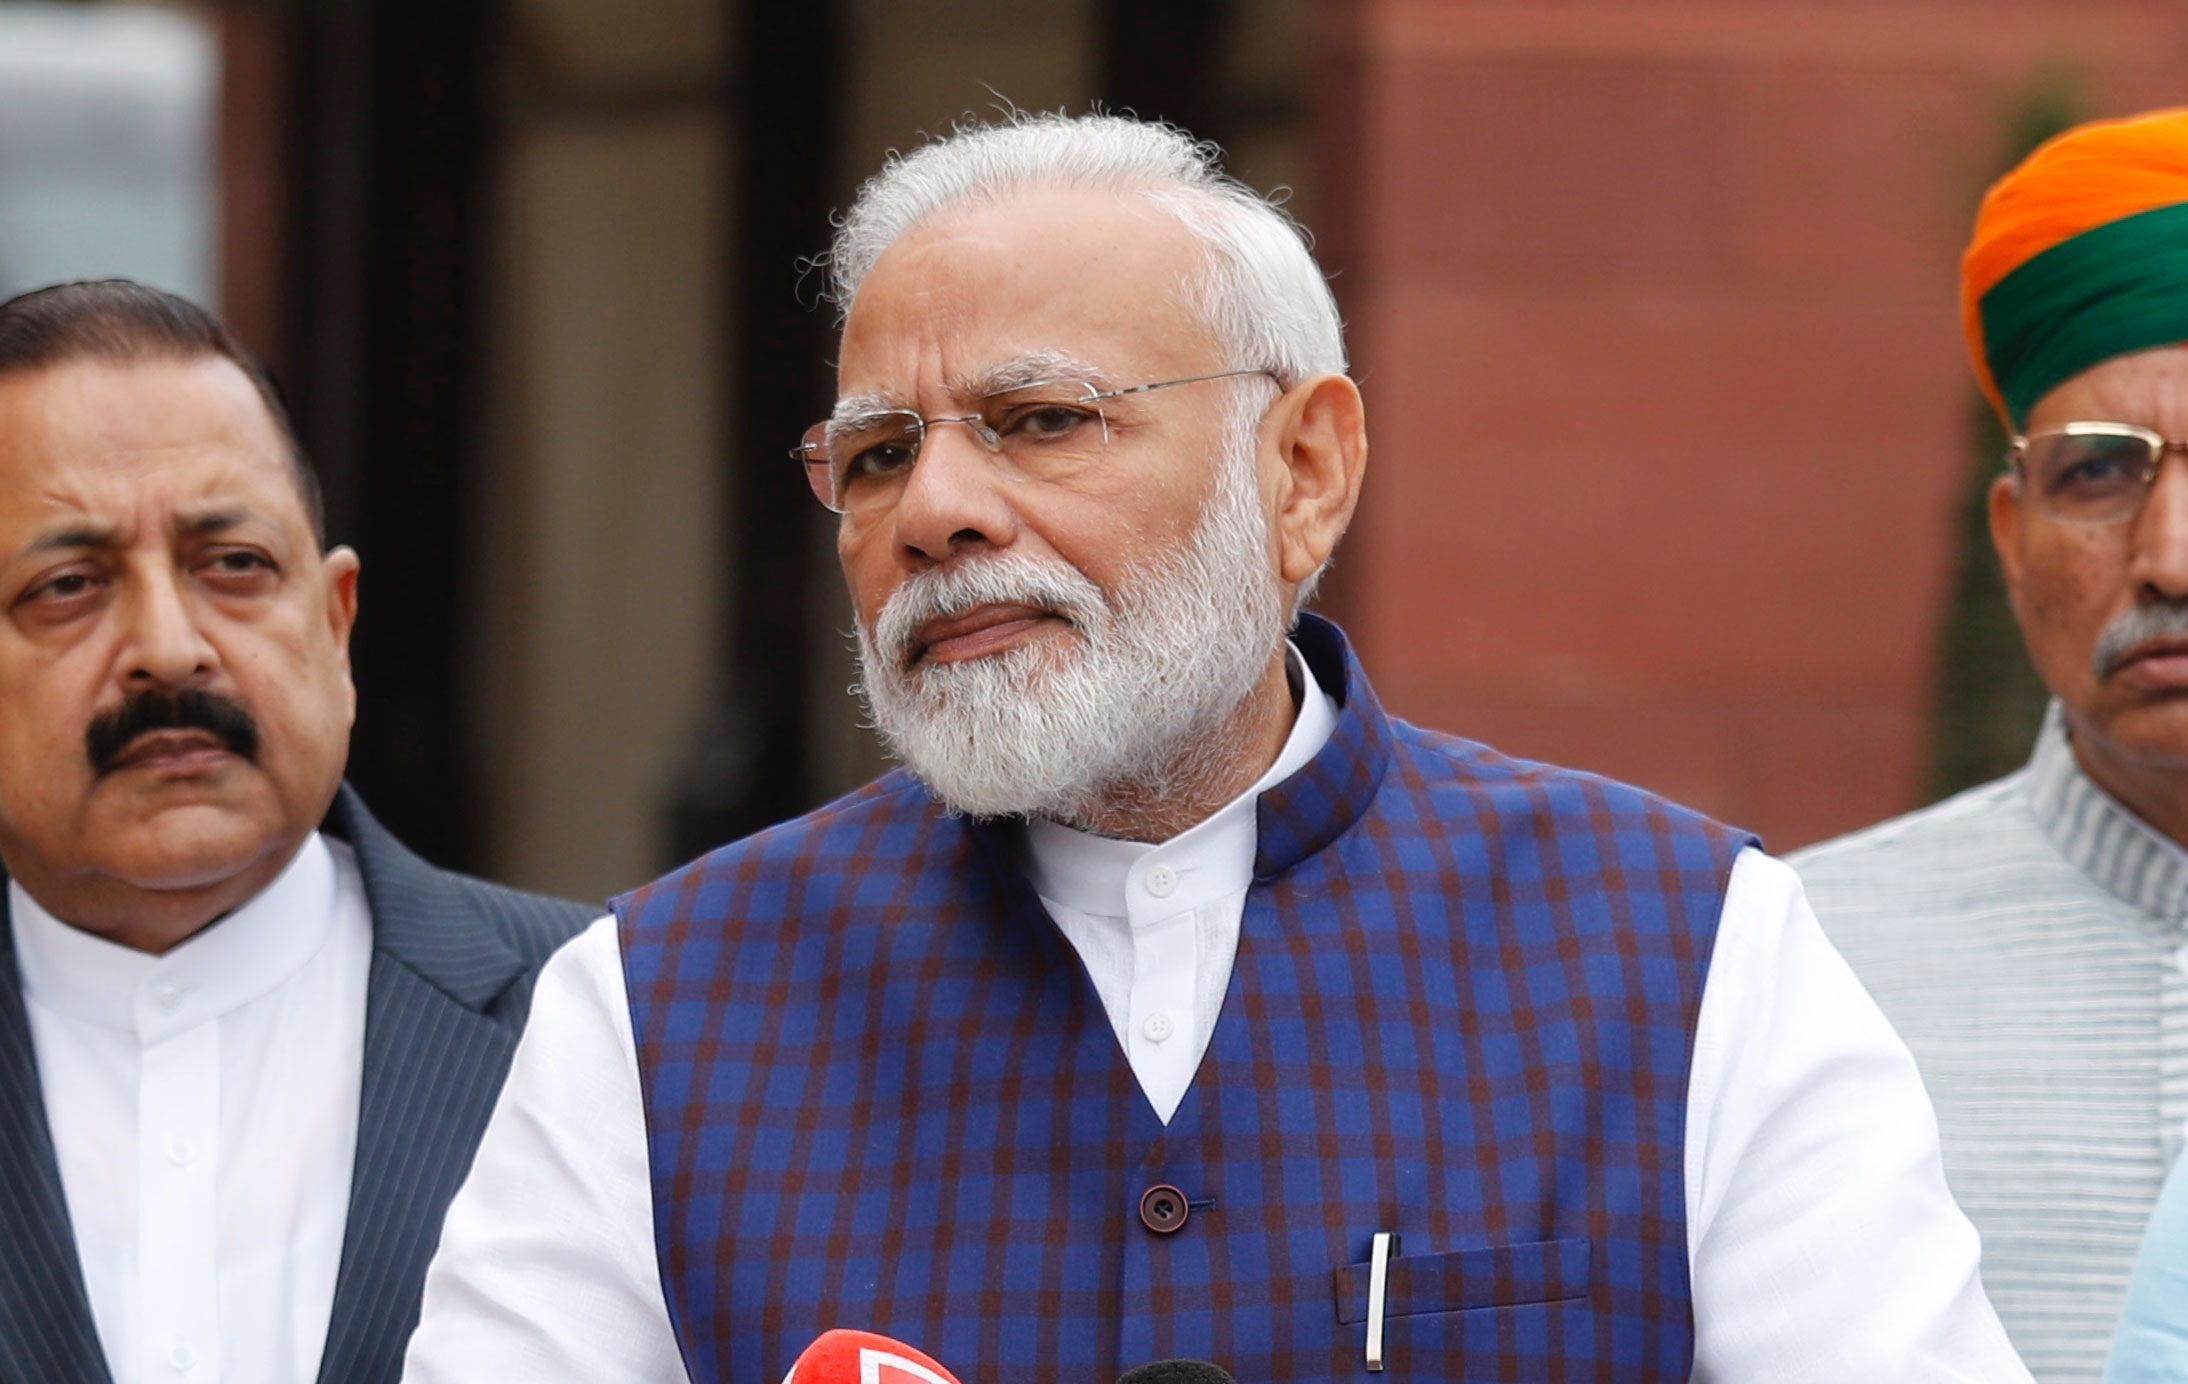 Modi had met officials from top companies, including Zydus Cadila, Torrent Pharmaceuticals and Wockhardt, in New Delhi on January 2, the website reported, citing government officials.